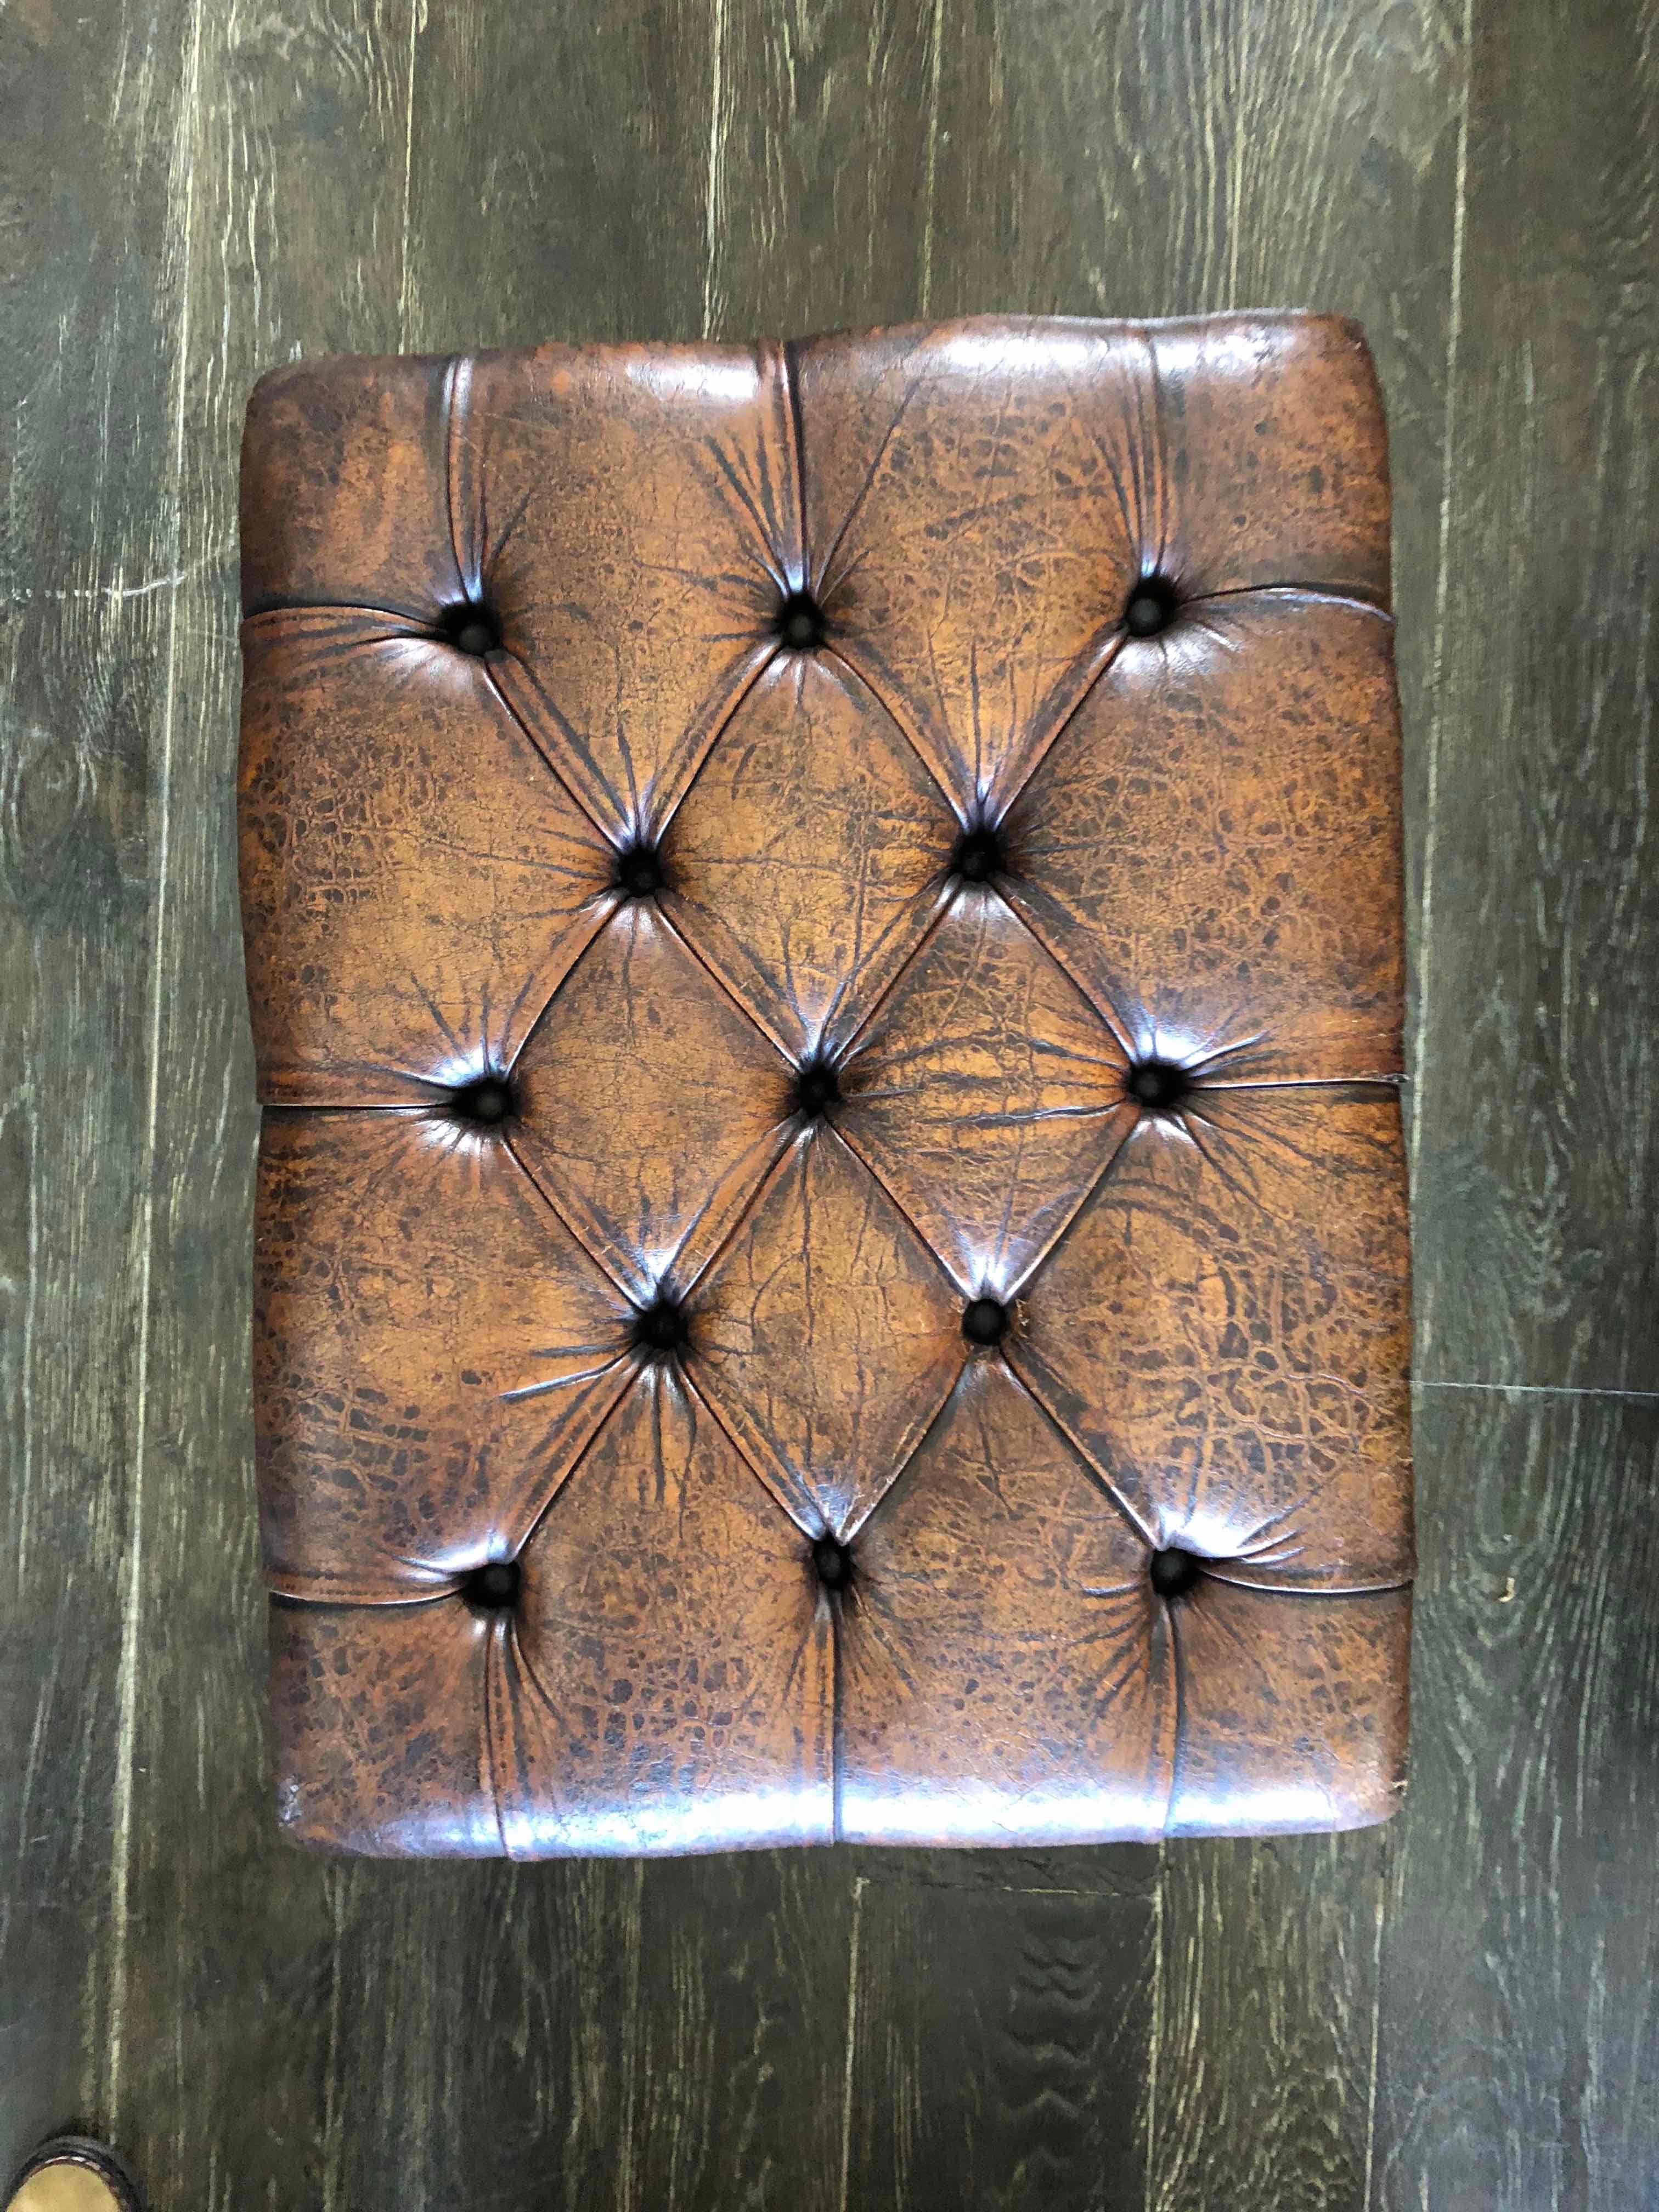 Early 20th century English leather footstool or bench. 